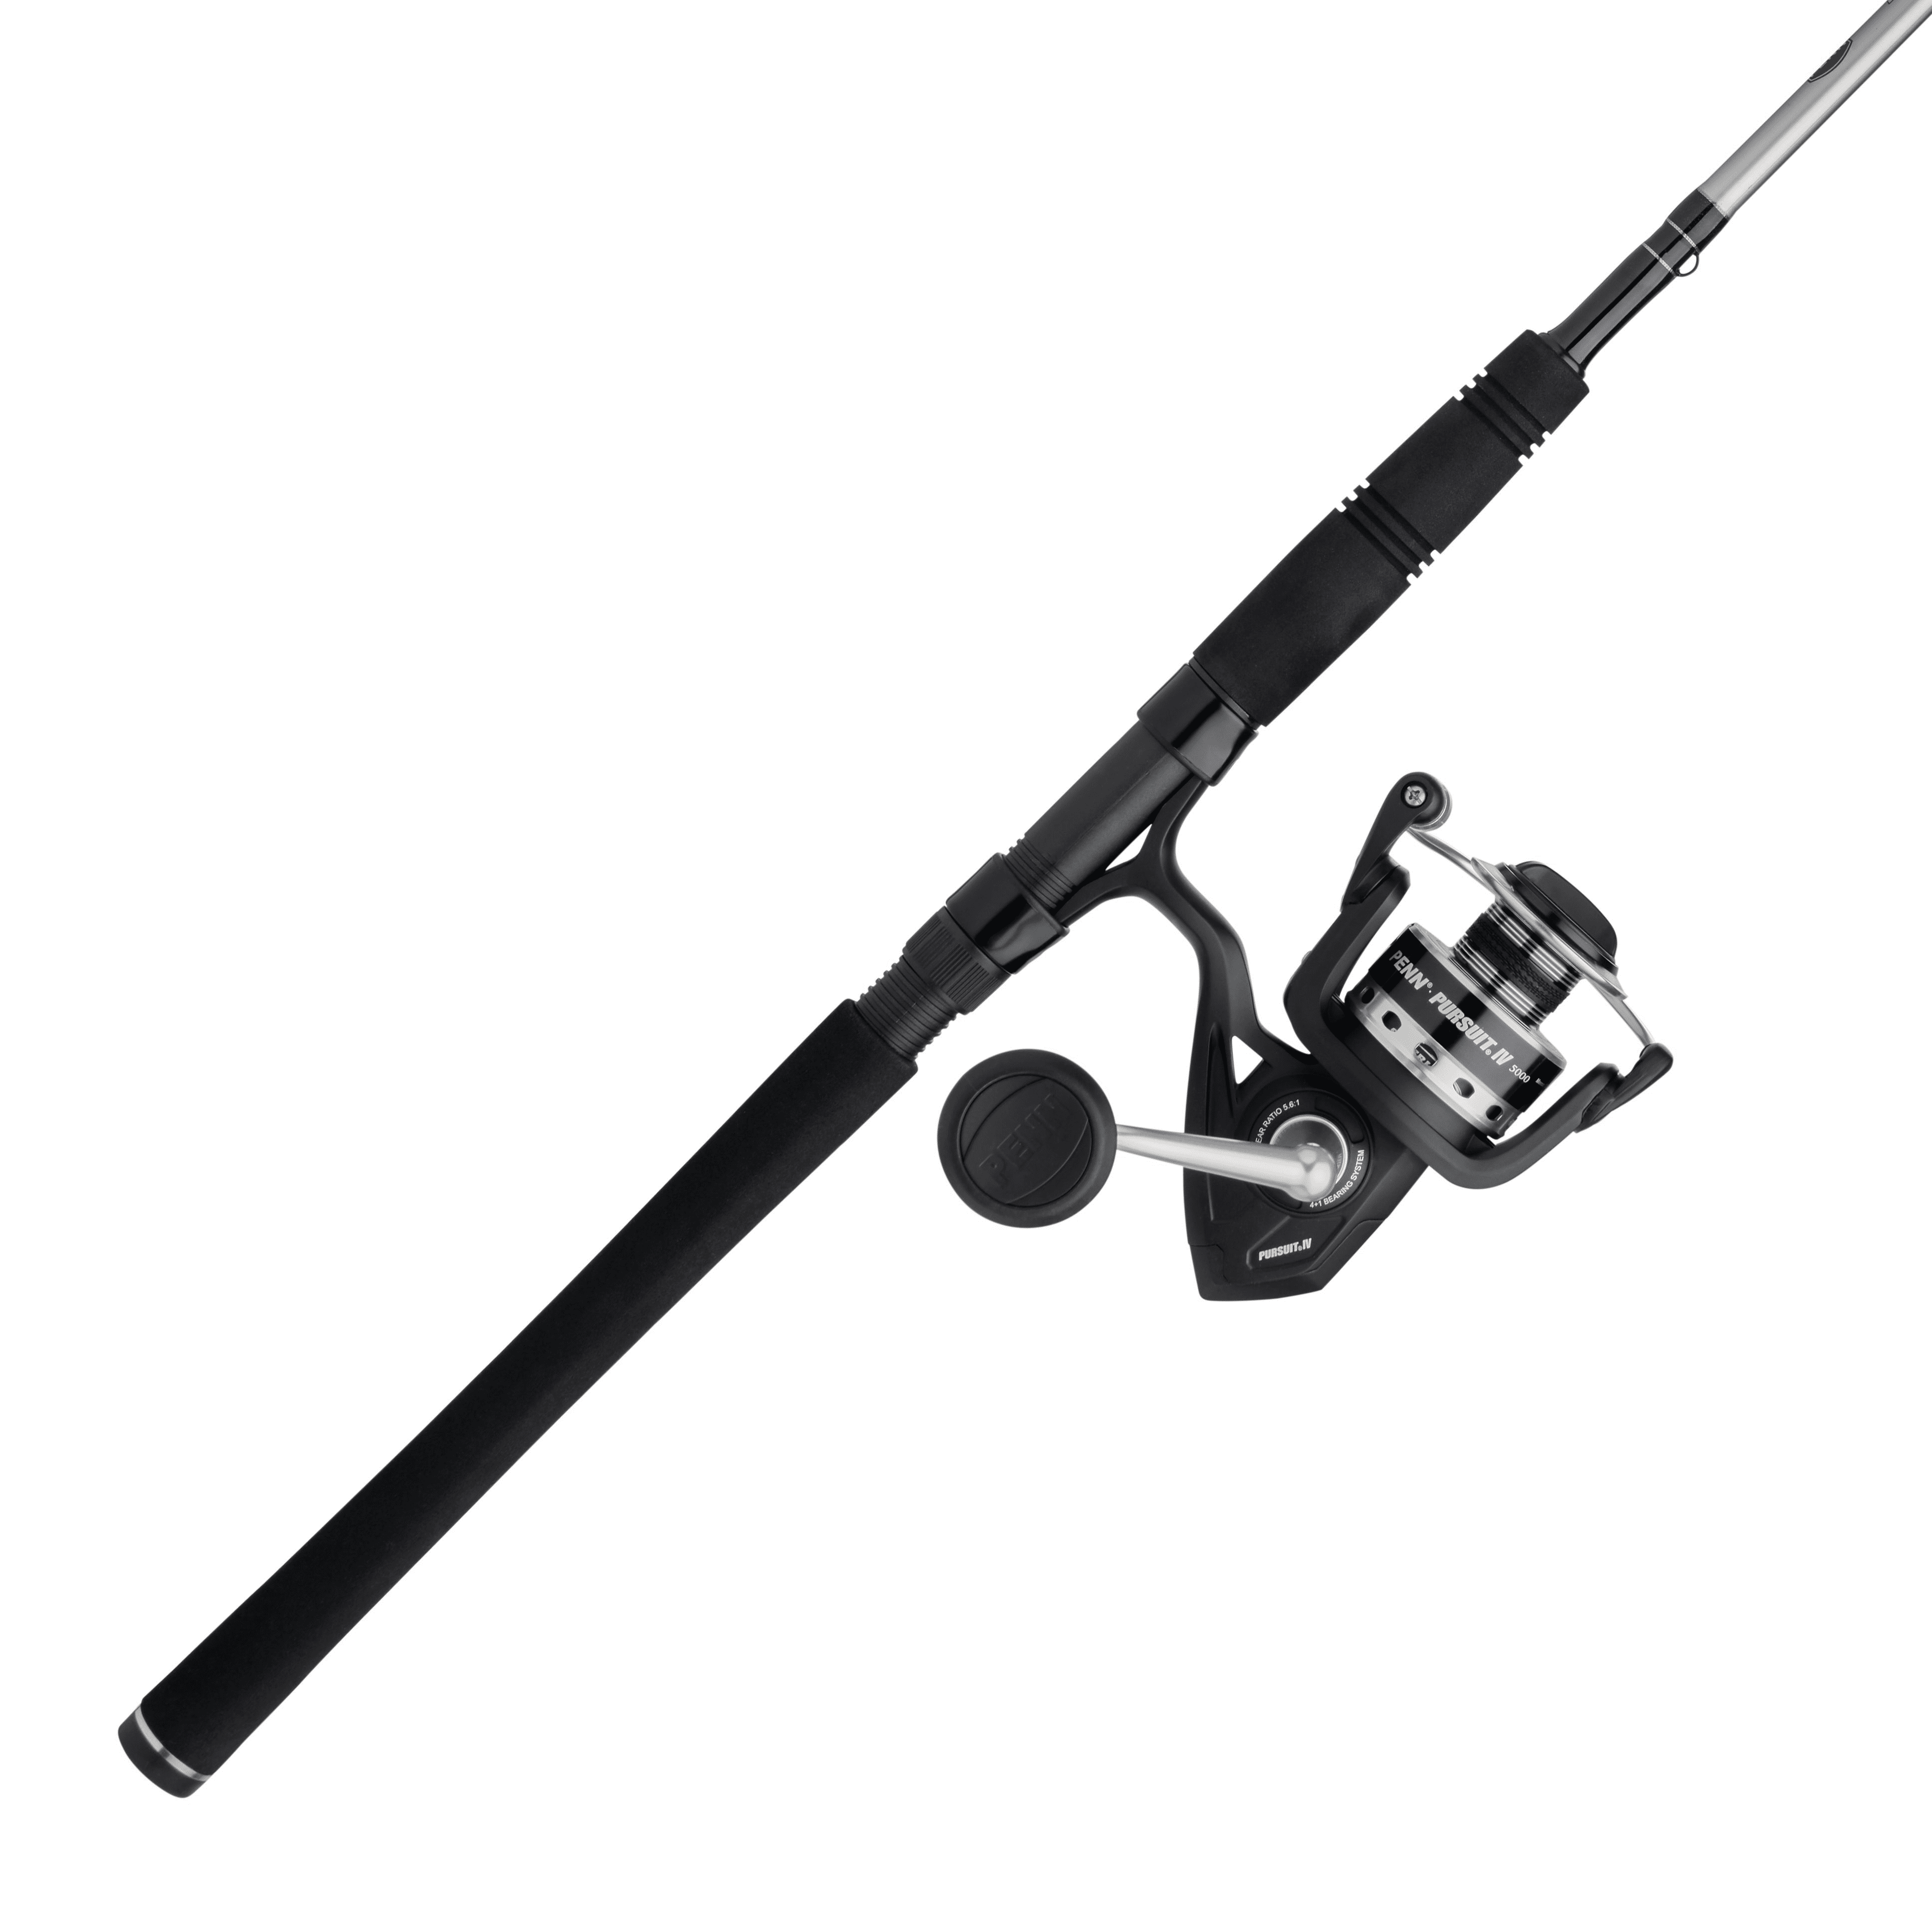 Penn Squall Fishing Rod 5'6" 1 Piece 15-24kg Overhead Rod NEW with Tags LAST ONE 